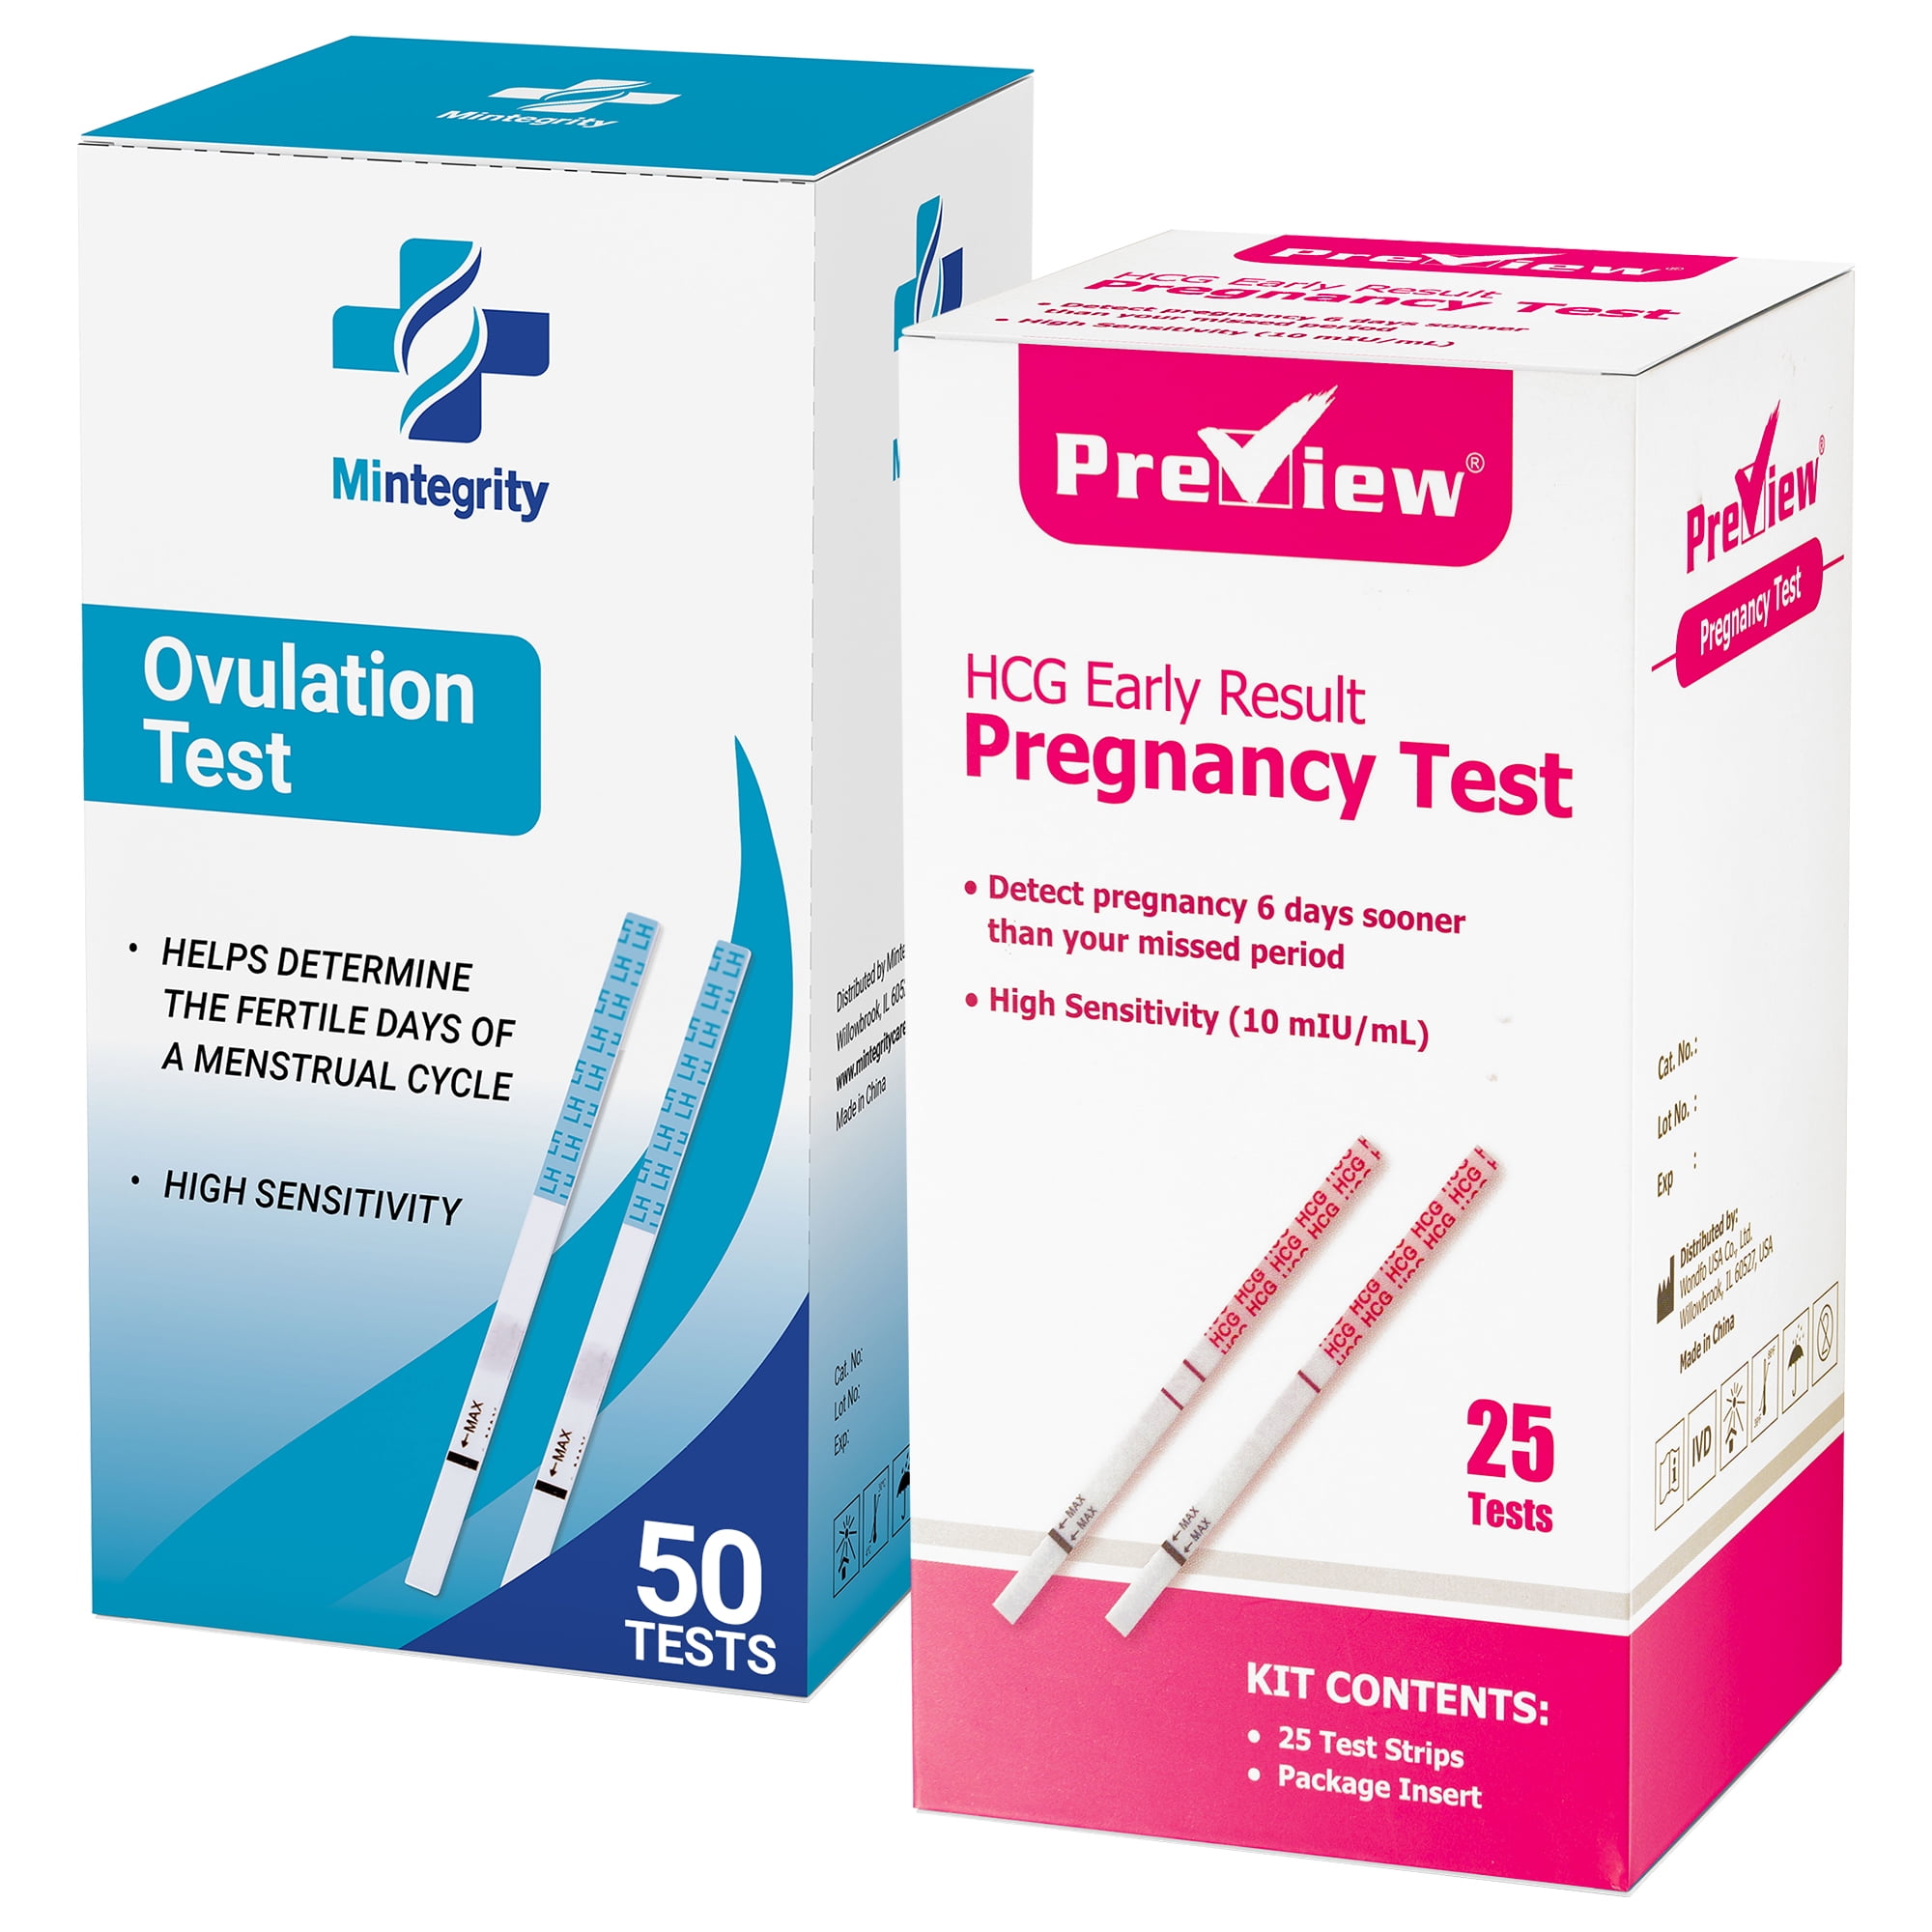 MomMed Ovulation and Pregnancy Test Strips (HCG20-LH60), Includes